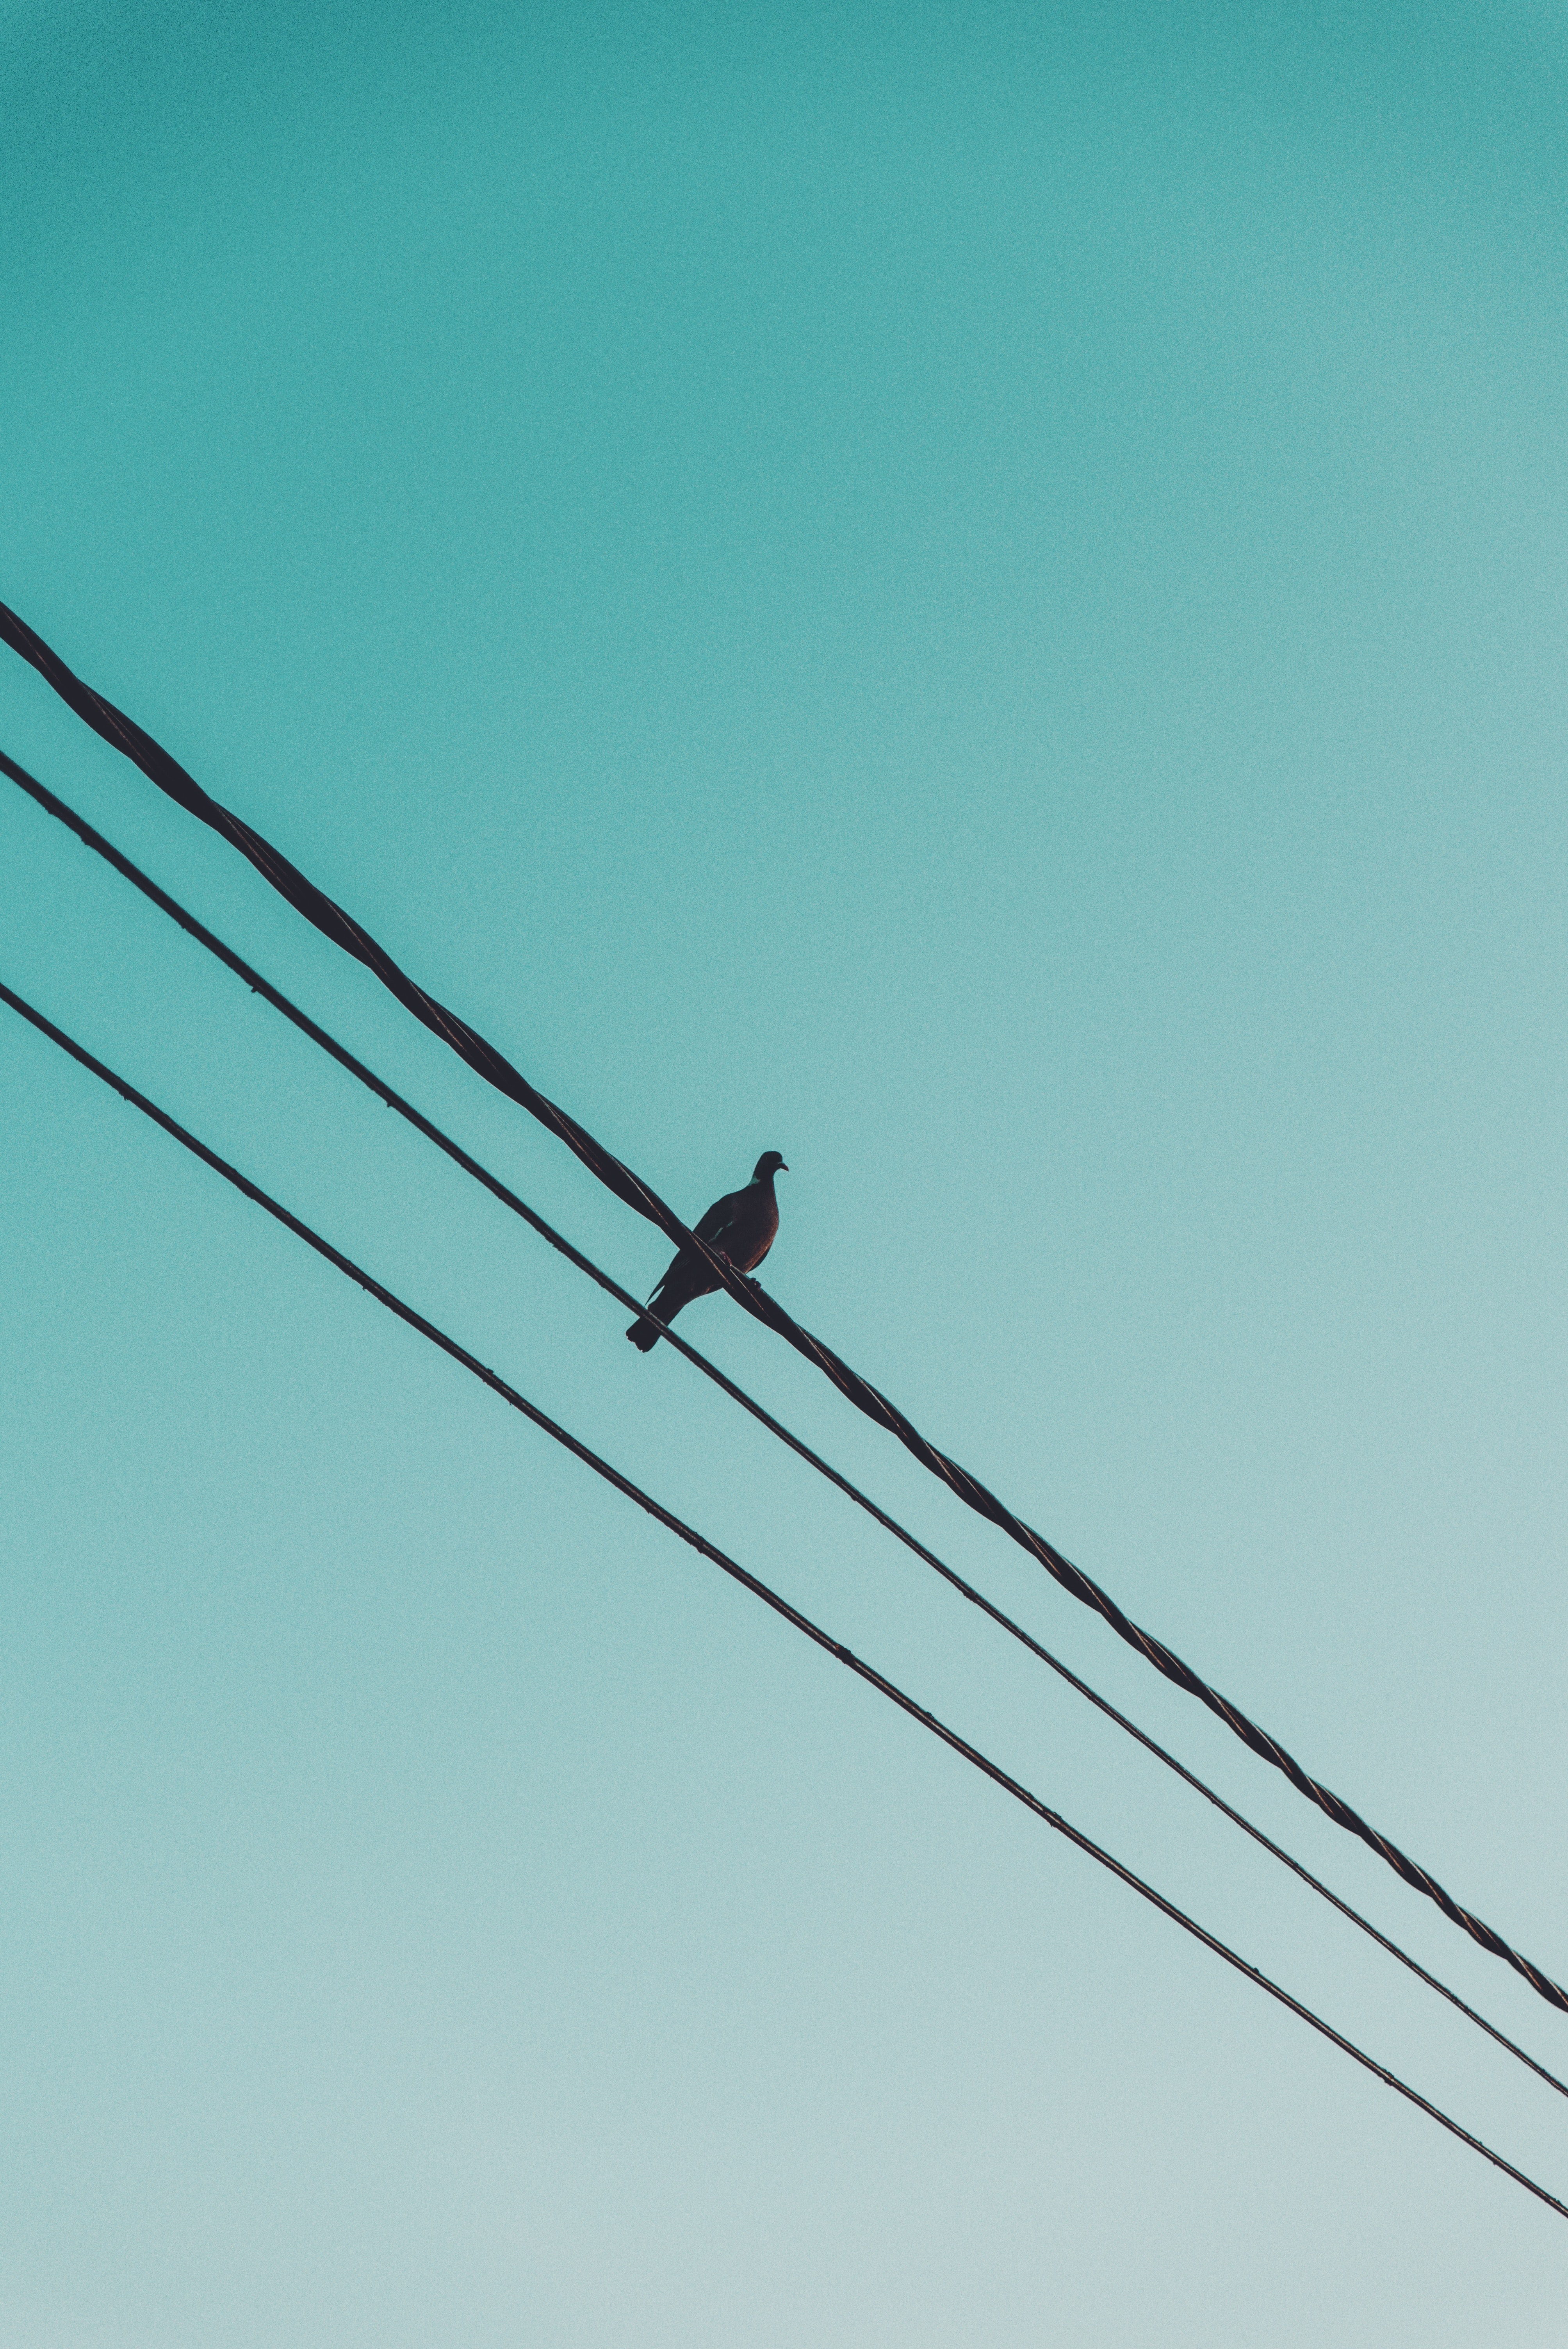 wires, dove, animals, sky, wire lock screen backgrounds